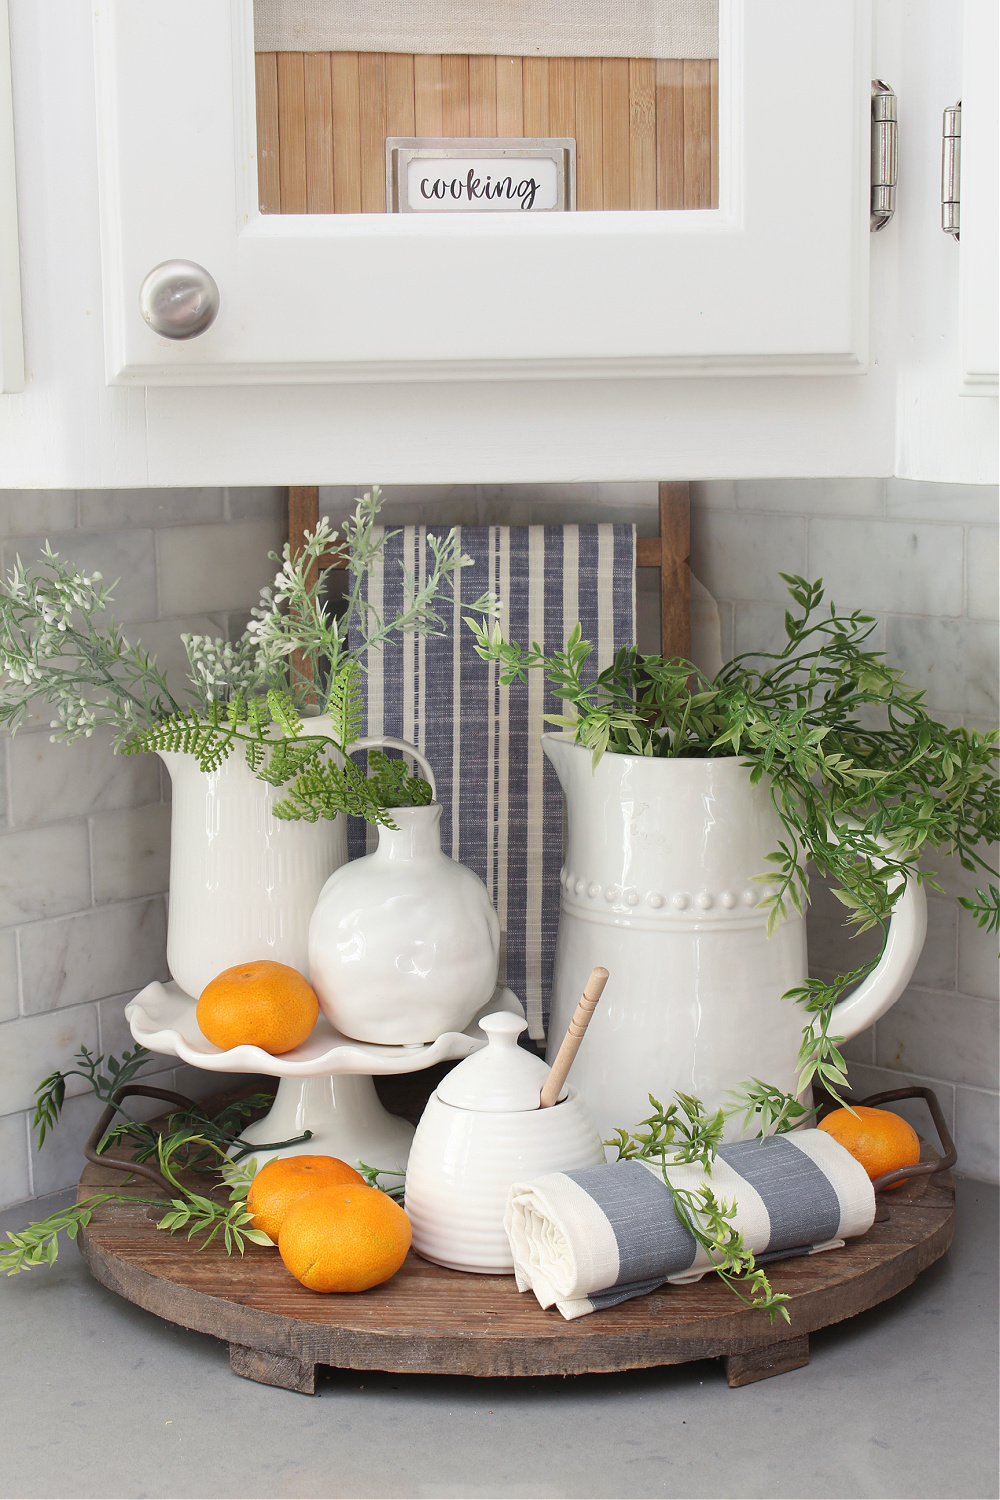 Summer vignette in a kitchen with white ceramics and pops of blue and orange.